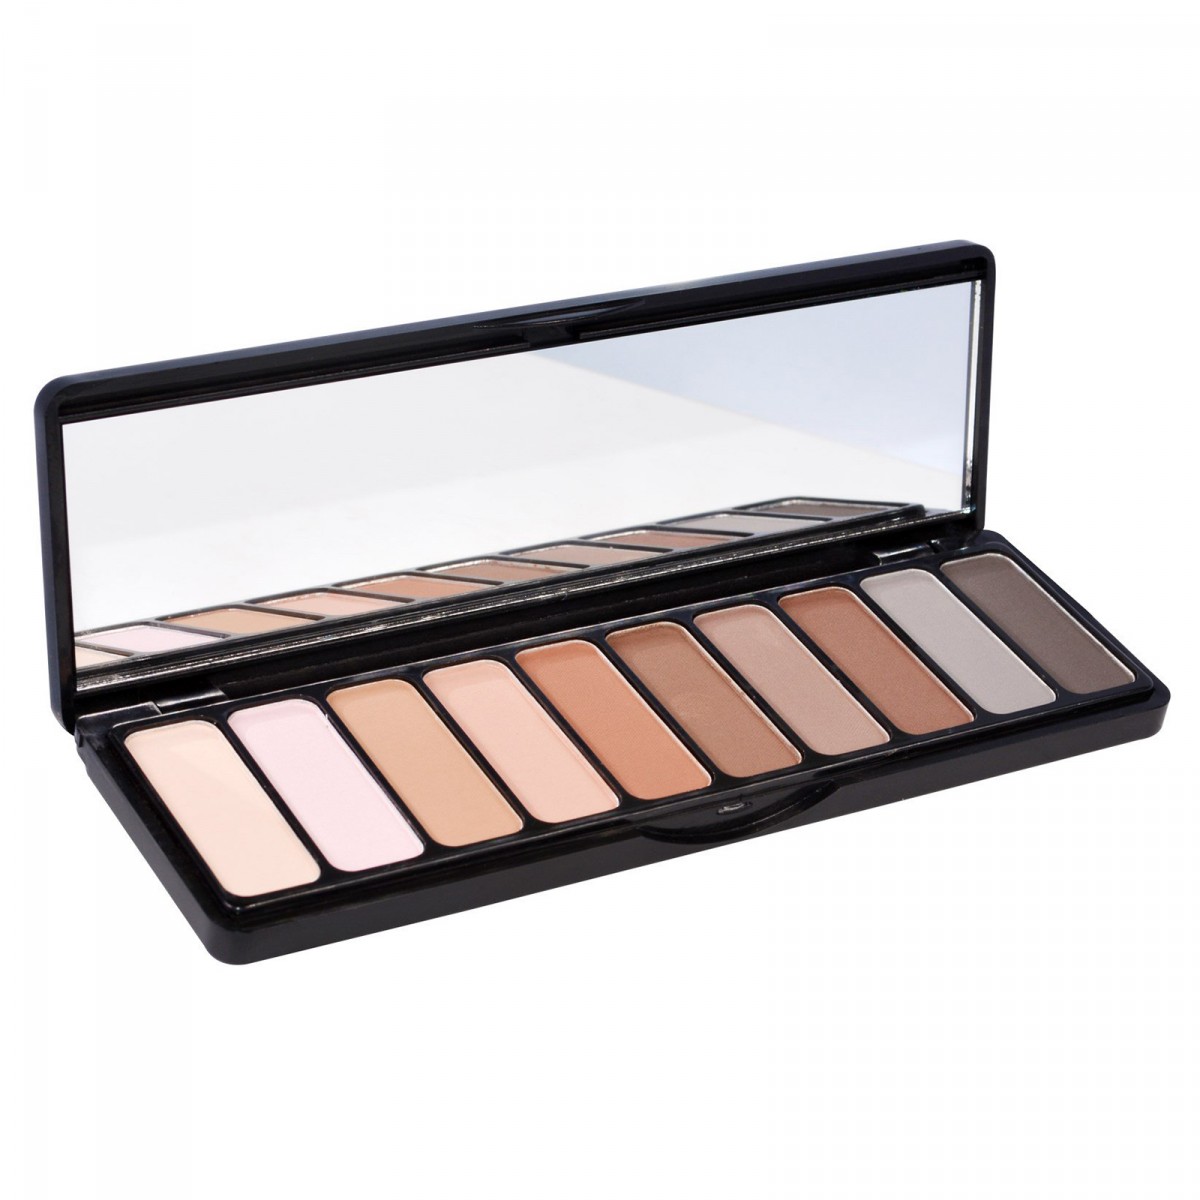 e.l.f. Mad for Matte 10pc Eyeshadow Palette, Nude Mood 